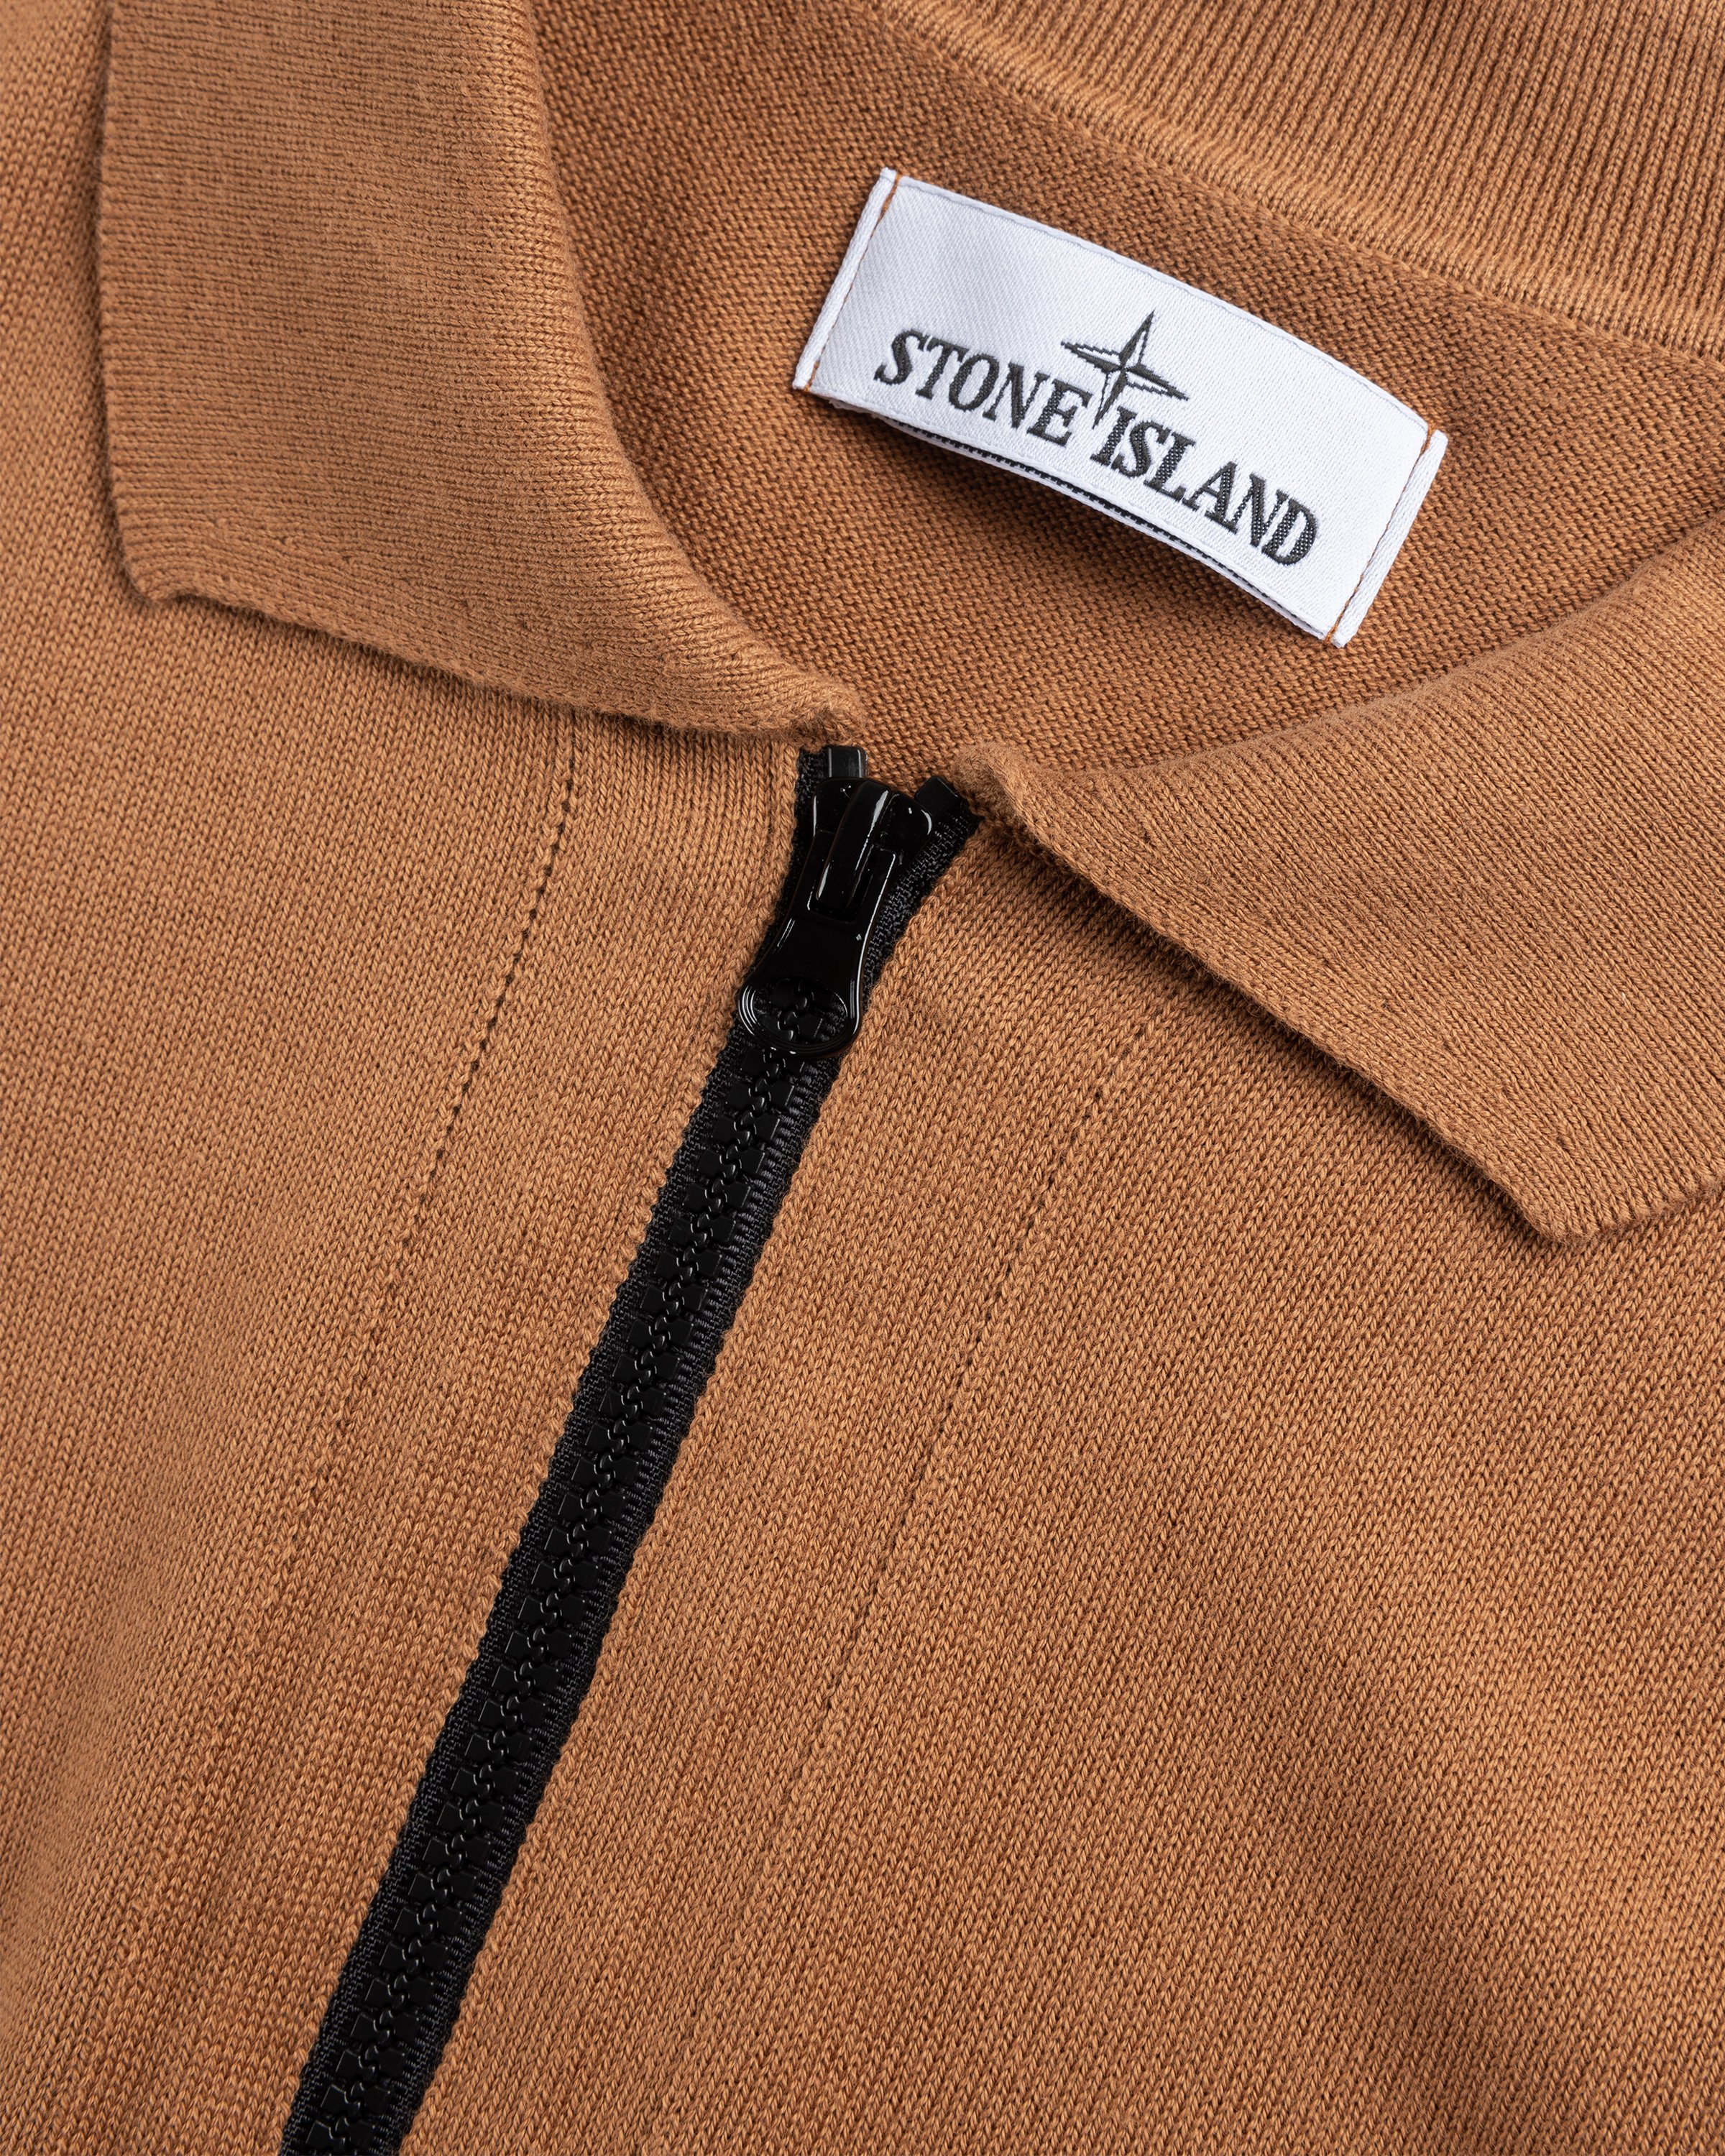 Stone Island - KNITWEAR RUST - Clothing - Red - Image 7